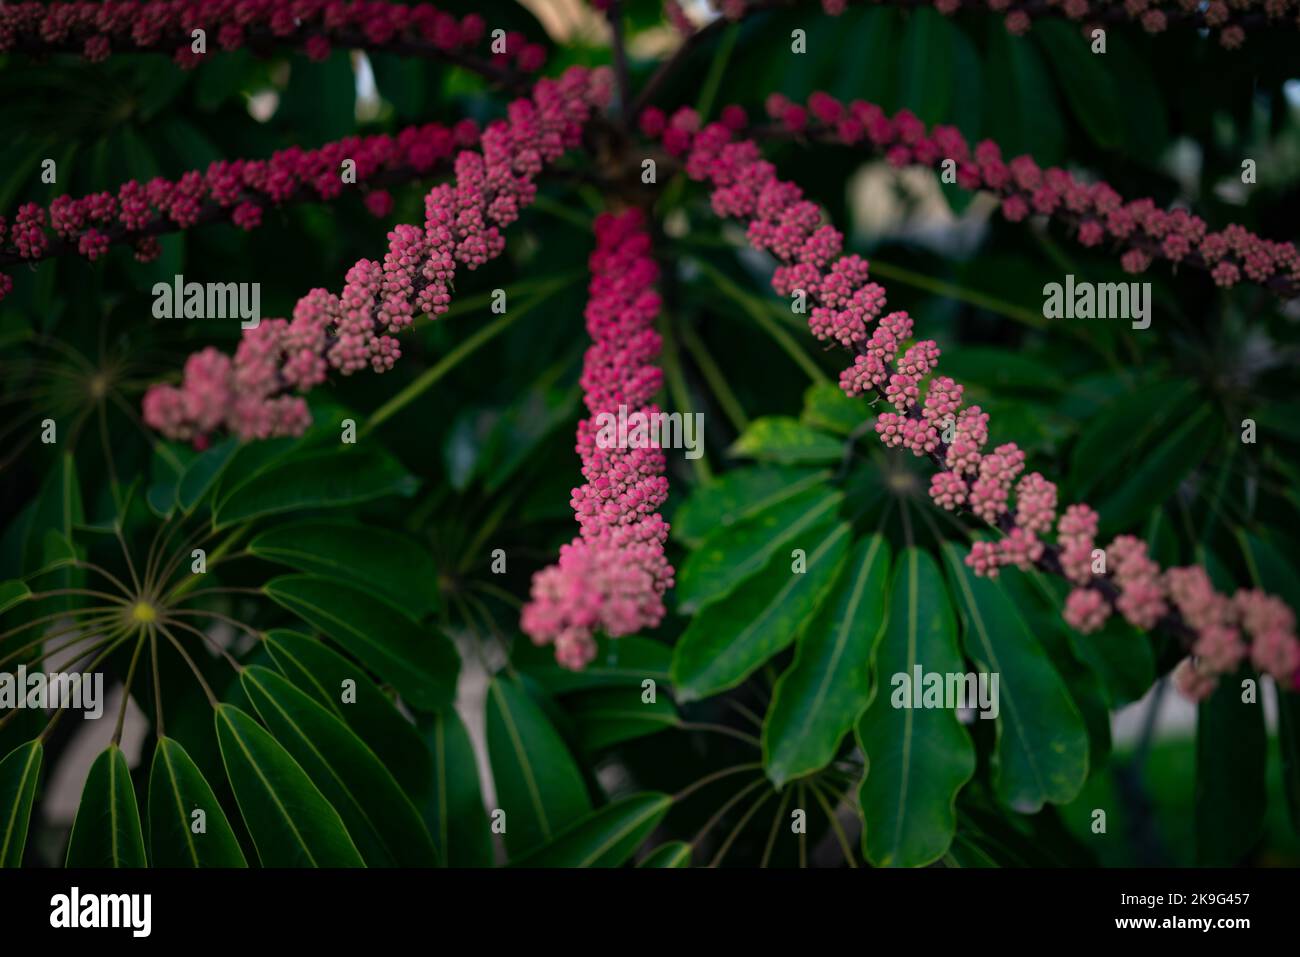 Mostly blurred red fruits and leaves of schefflera actinofphylla umbrella tree Stock Photo